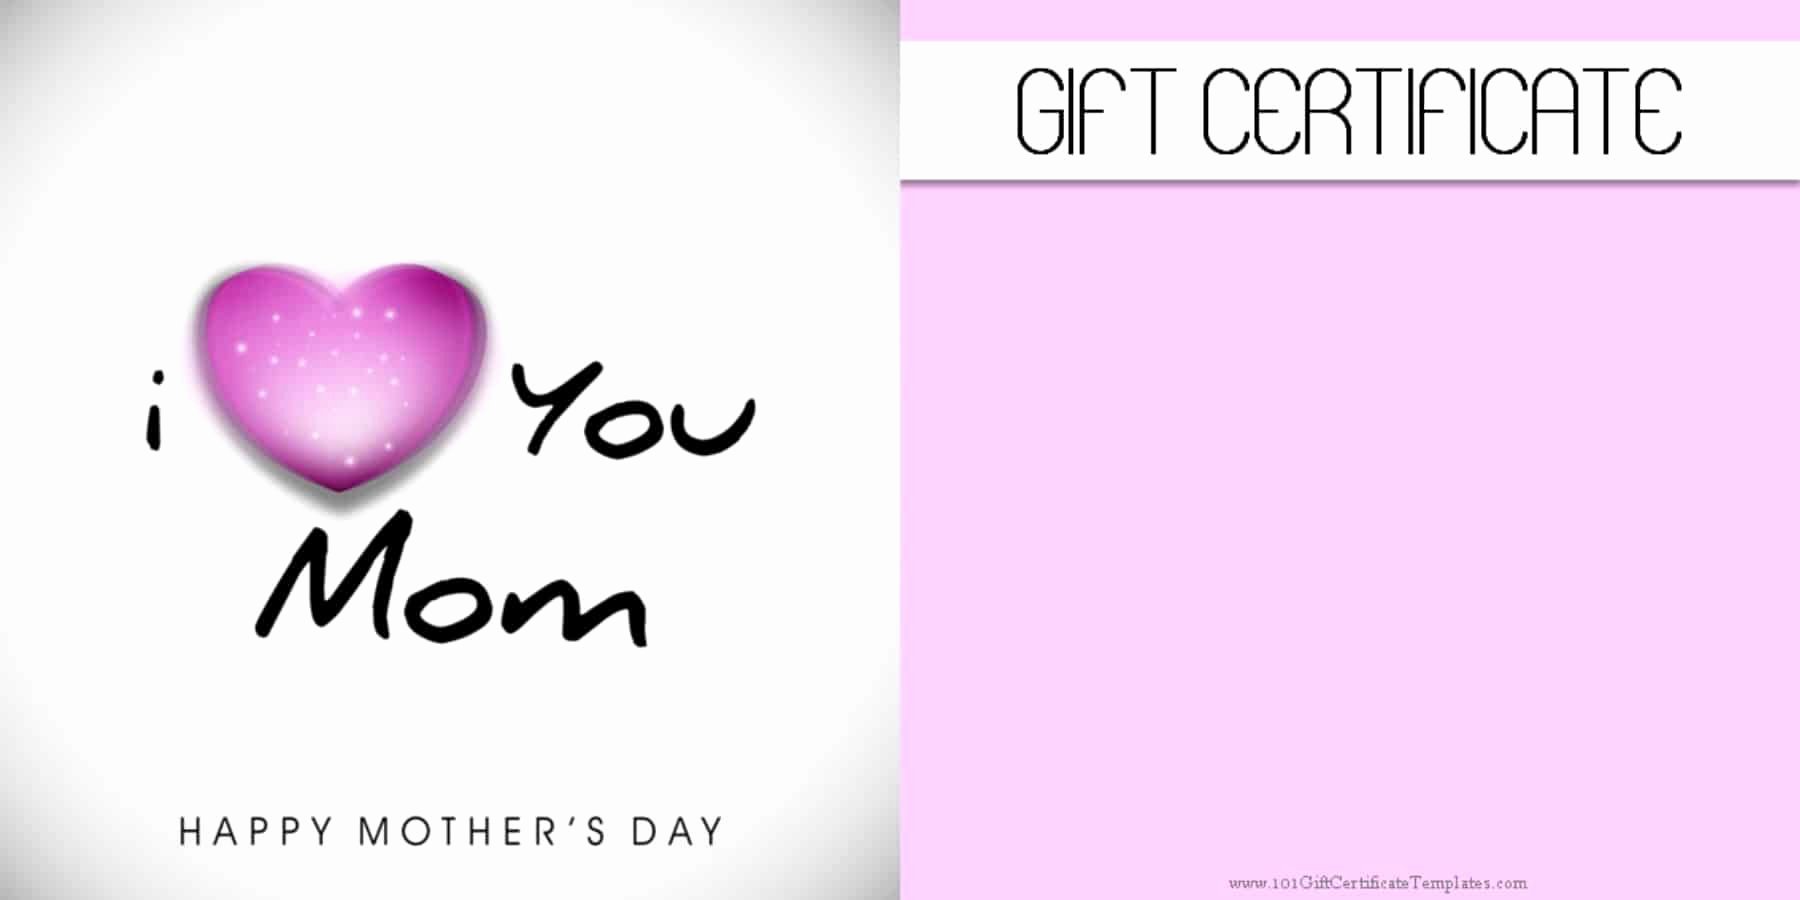 Mothers Day Certificate Template Luxury Mother S Day Gift Certificate Templates